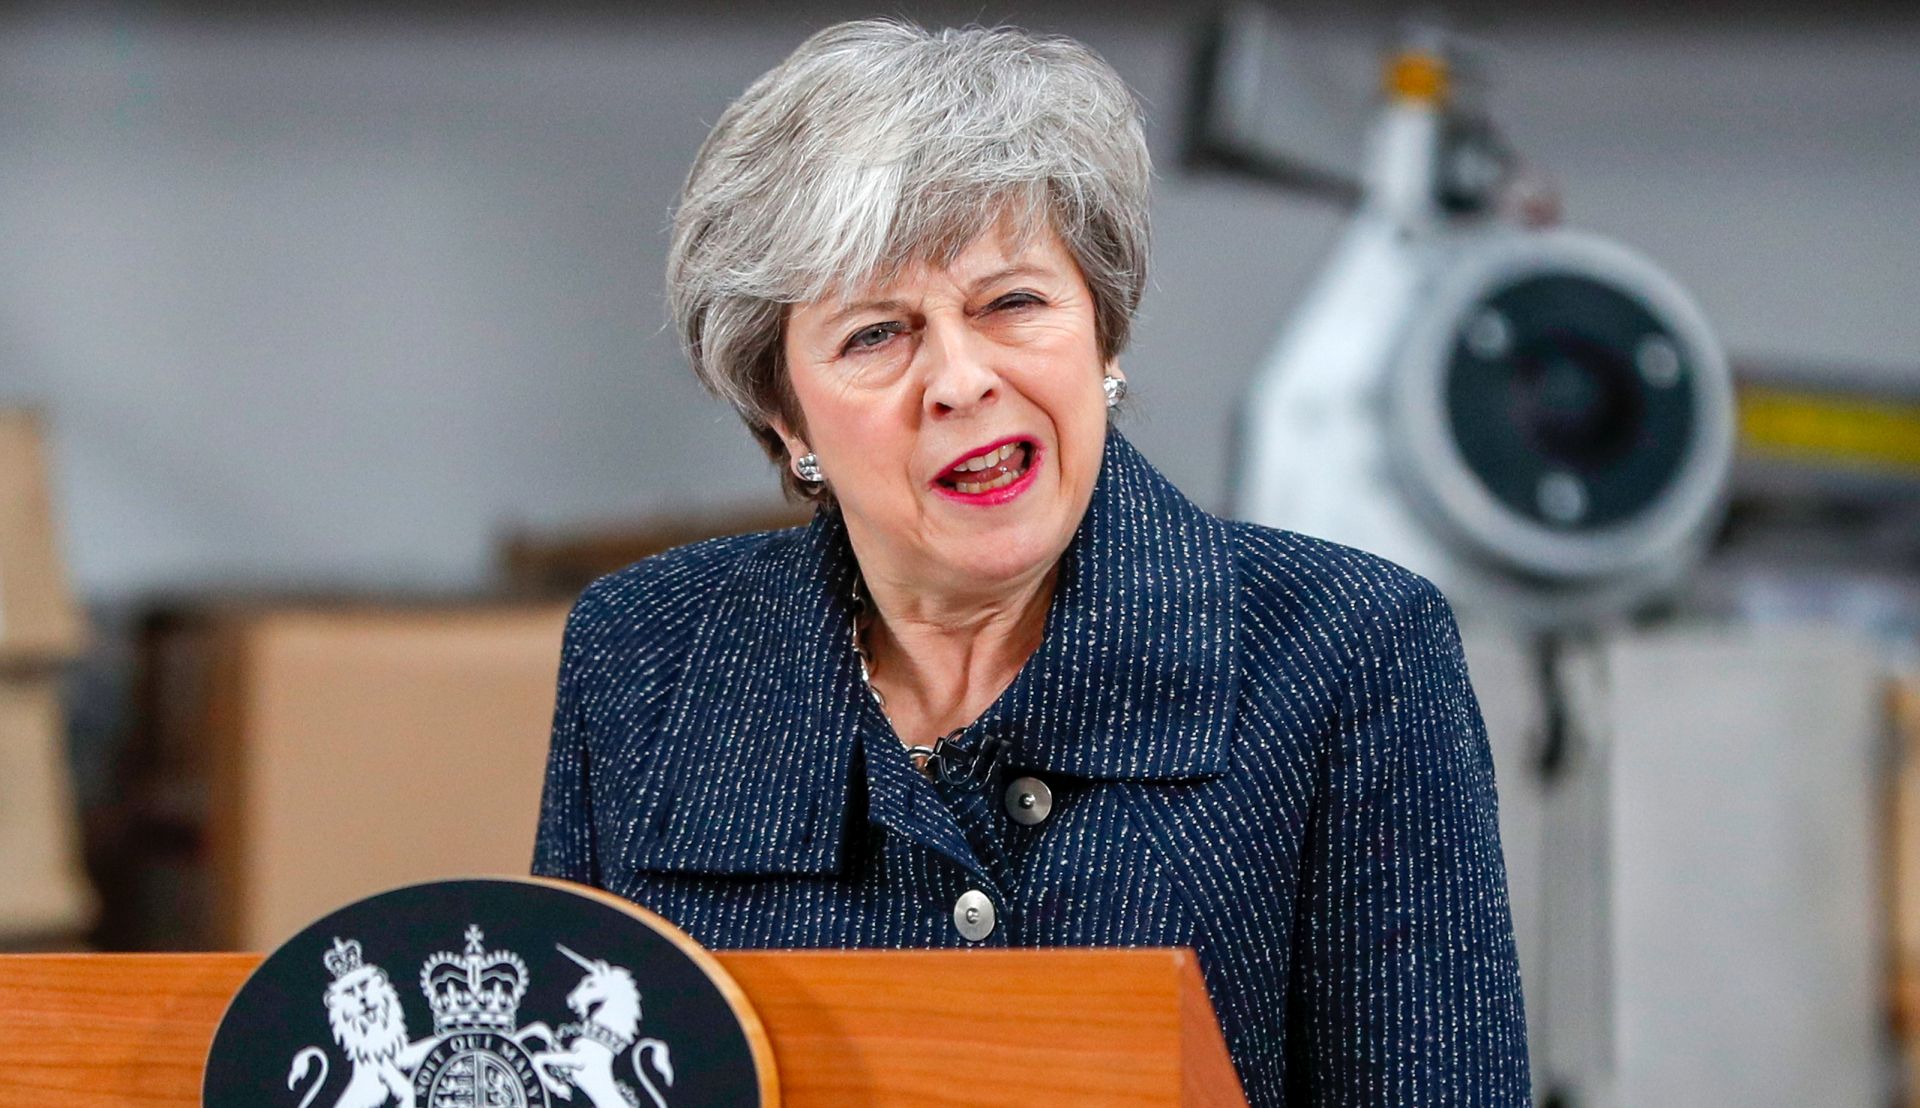 epa07422272 British Prime Minister Theresa May gives a speech at Orsted A/S manufacturing facility in Grimsby, Britain, 08 March 2019. May appealed to members of Parliament to back her deal or risk seeing Brexit canceled, as she urged the European Union to help come up with a compromise.  EPA/Darren Staples / POOL